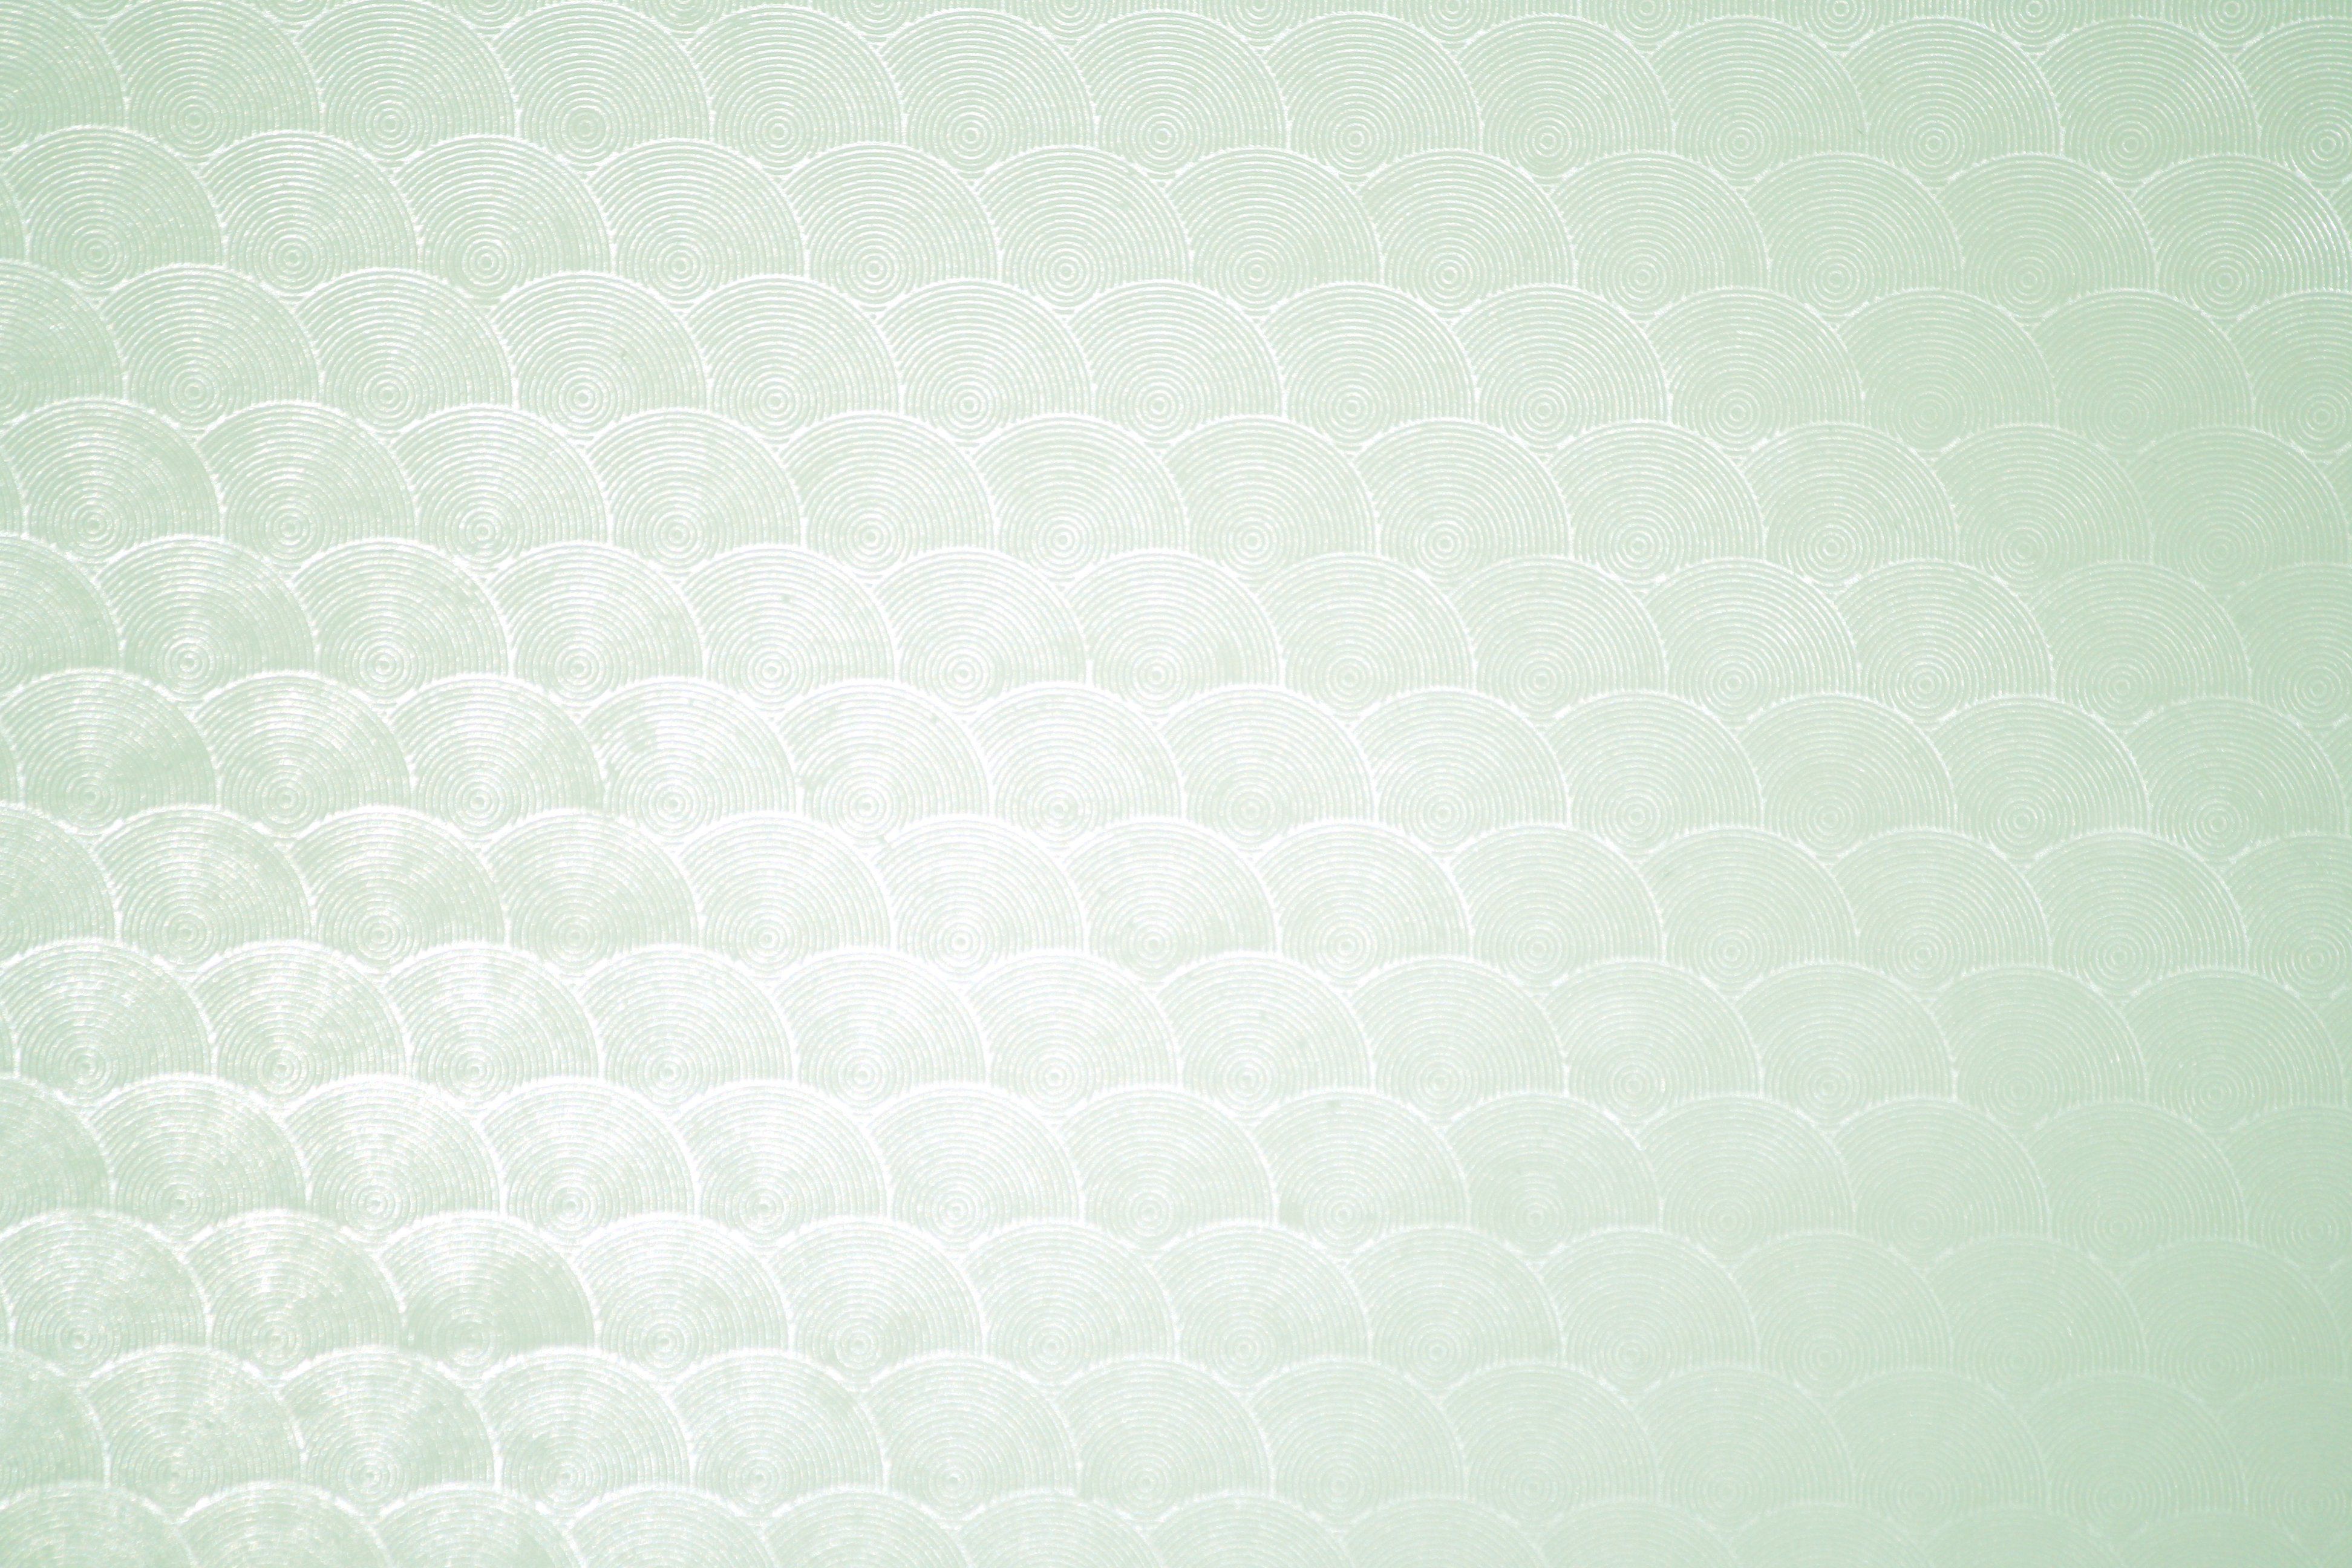 Sage Green Circle Patterned Plastic Texture Picture. Free Photograph. Photo Public Domain